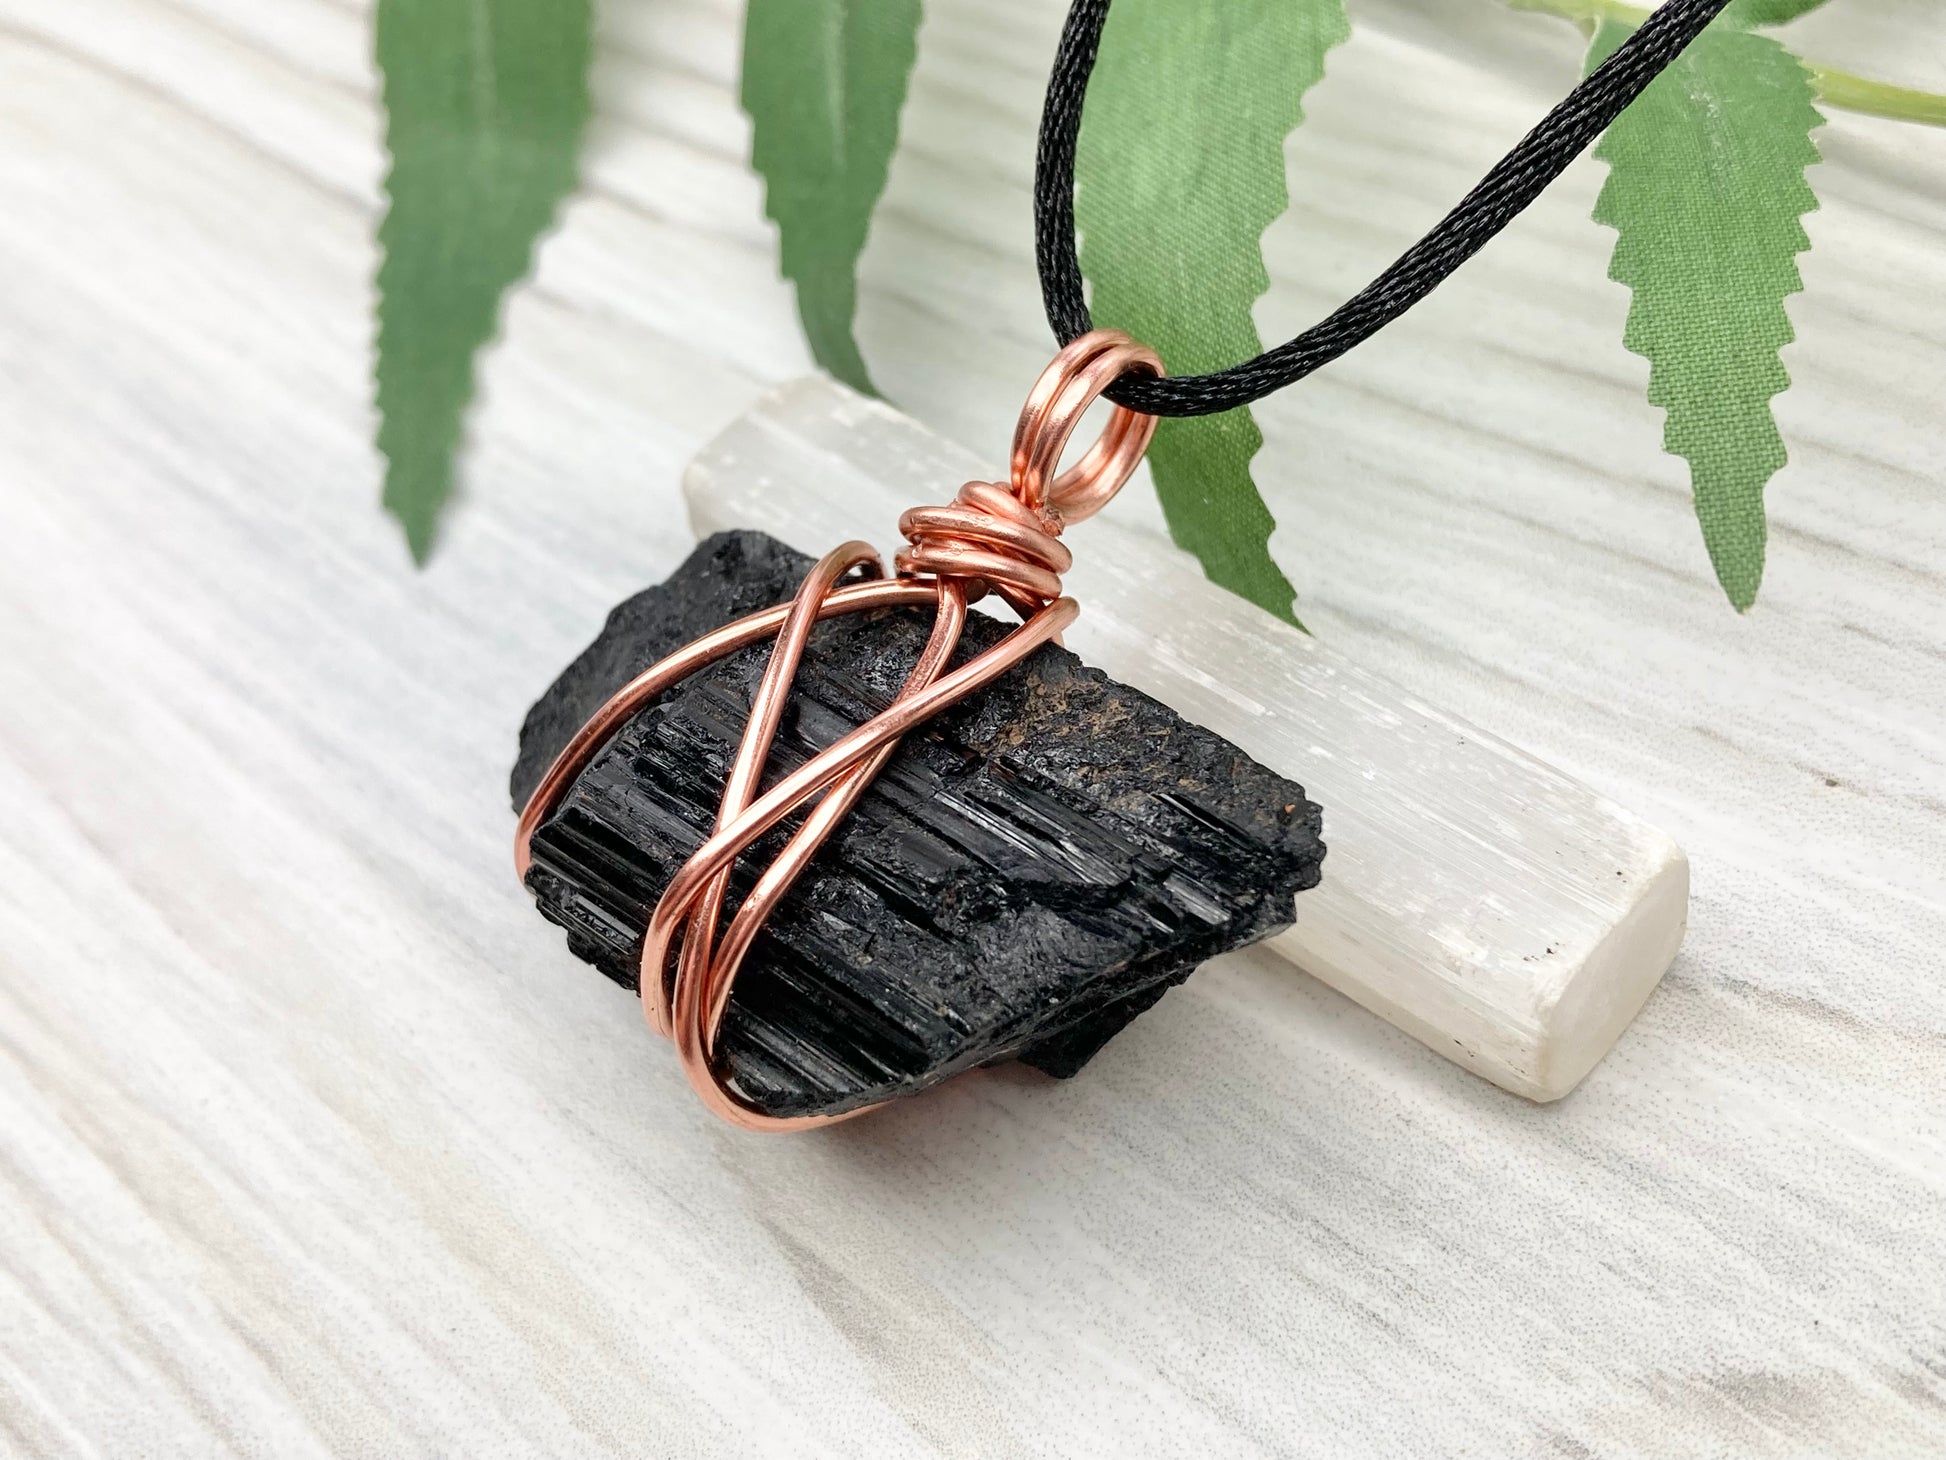 Chunky Black Tourmaline Necklace. Copper Wire Wrapped Stone Pendant. Raw Crystal Statement Jewelry. Comes On A Black Chain.